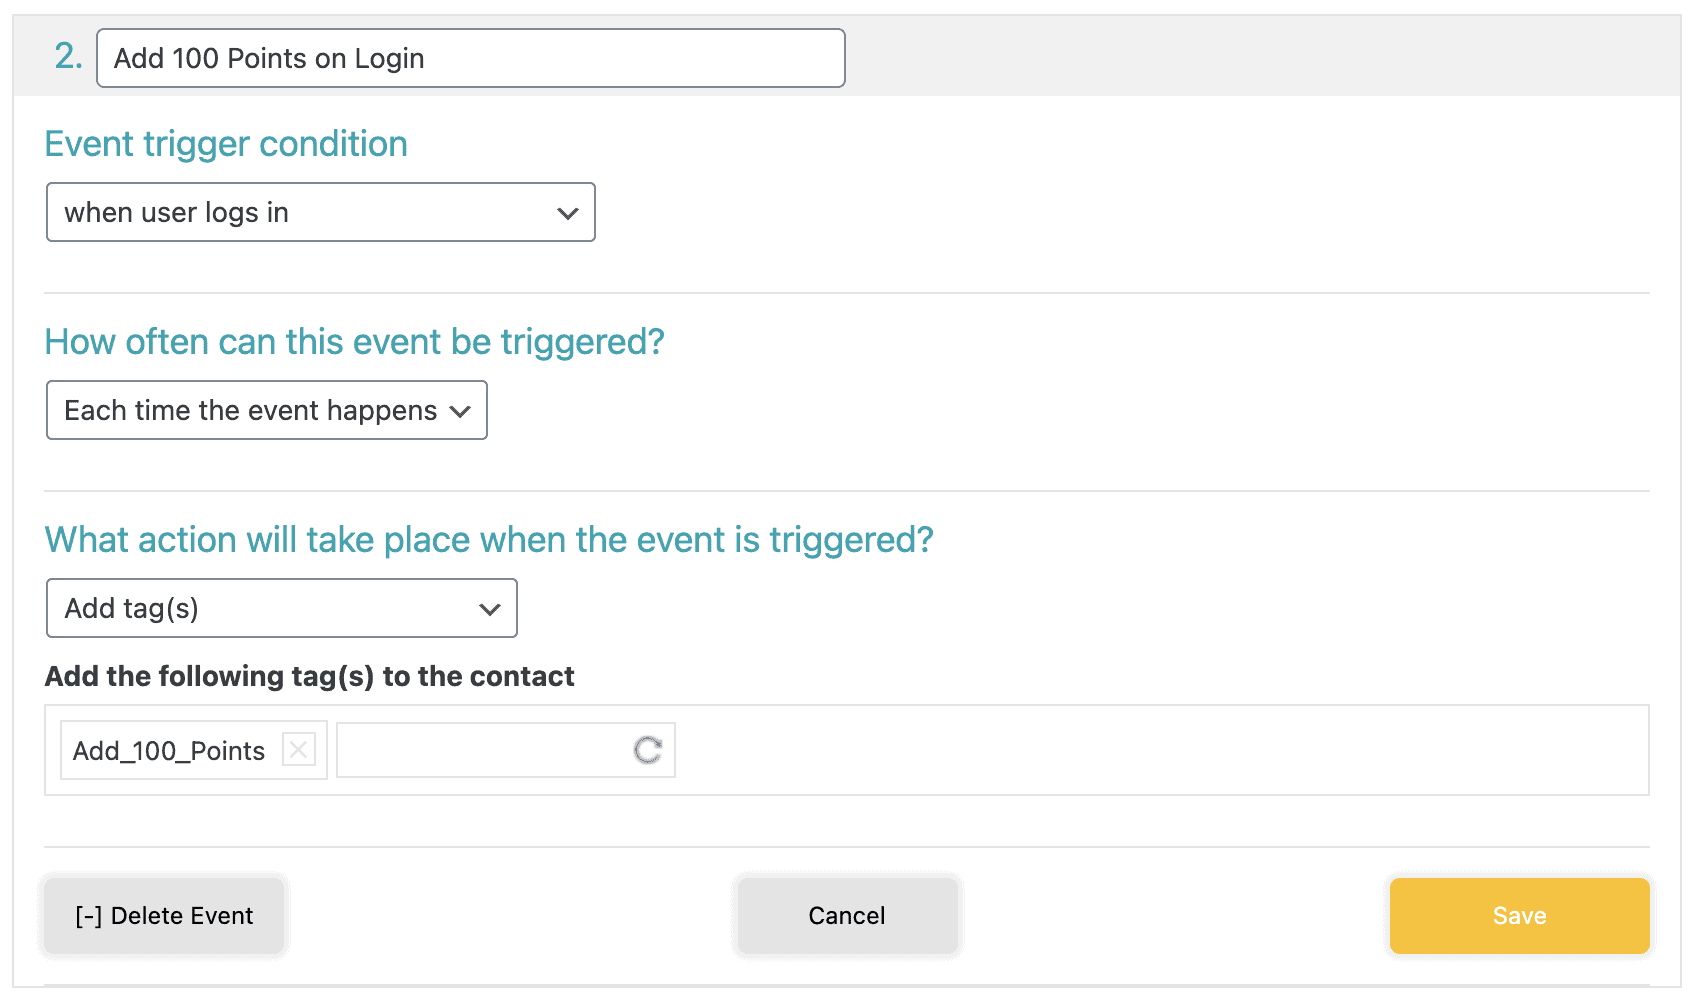 Screenshot showing how to add a progressally event for points on login